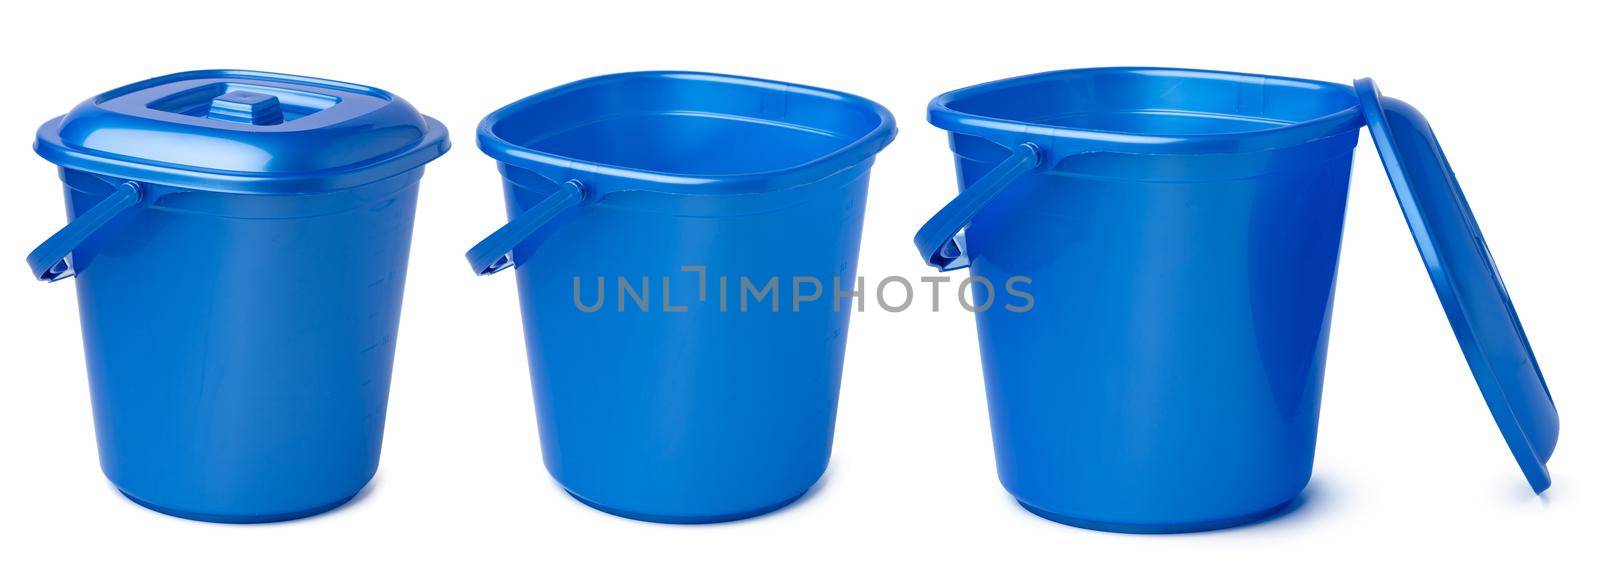 Plastic bucket with handle isolated on white background by Fabrikasimf